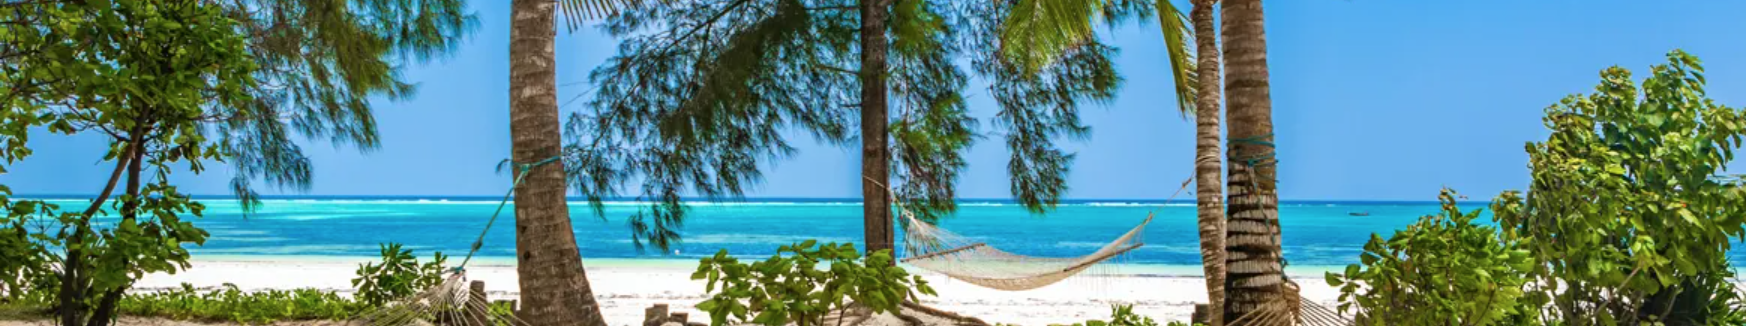 A view of a beach with white sand and lush greenery in Zanzibar, which can be visited via a cheap flight from Flight Centre.